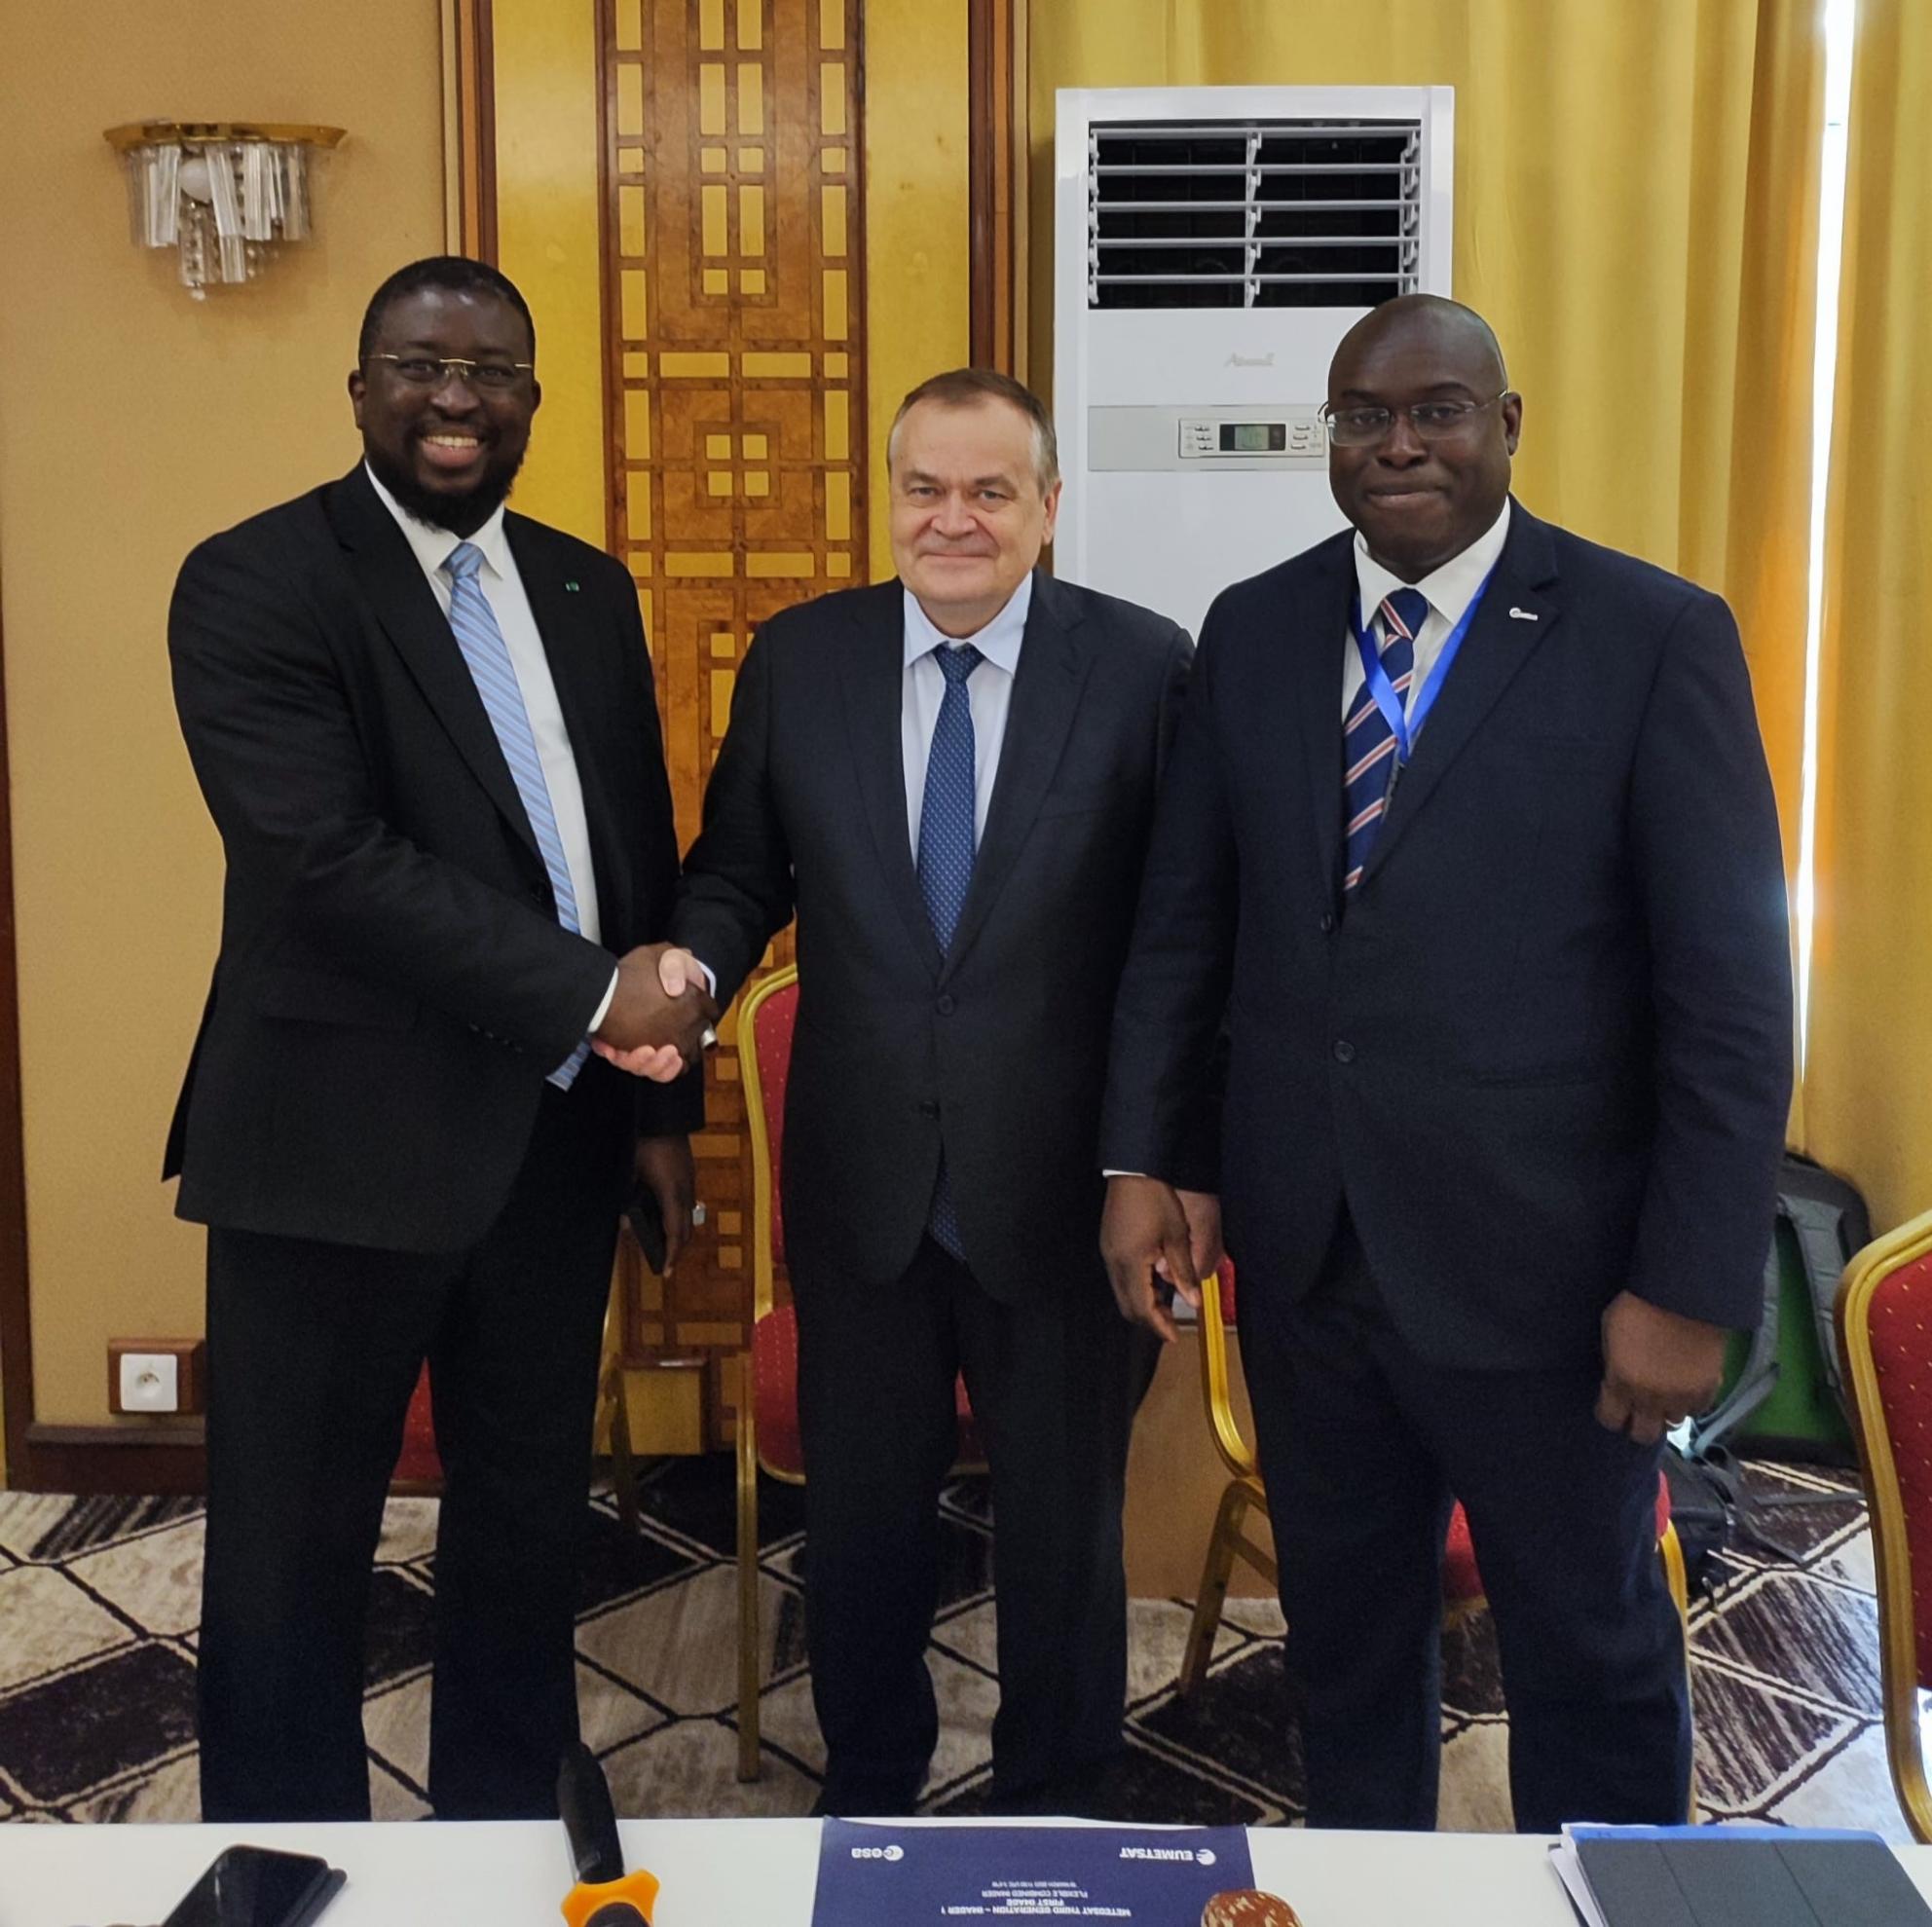 Africa, Europe to unite for sustainable space programs